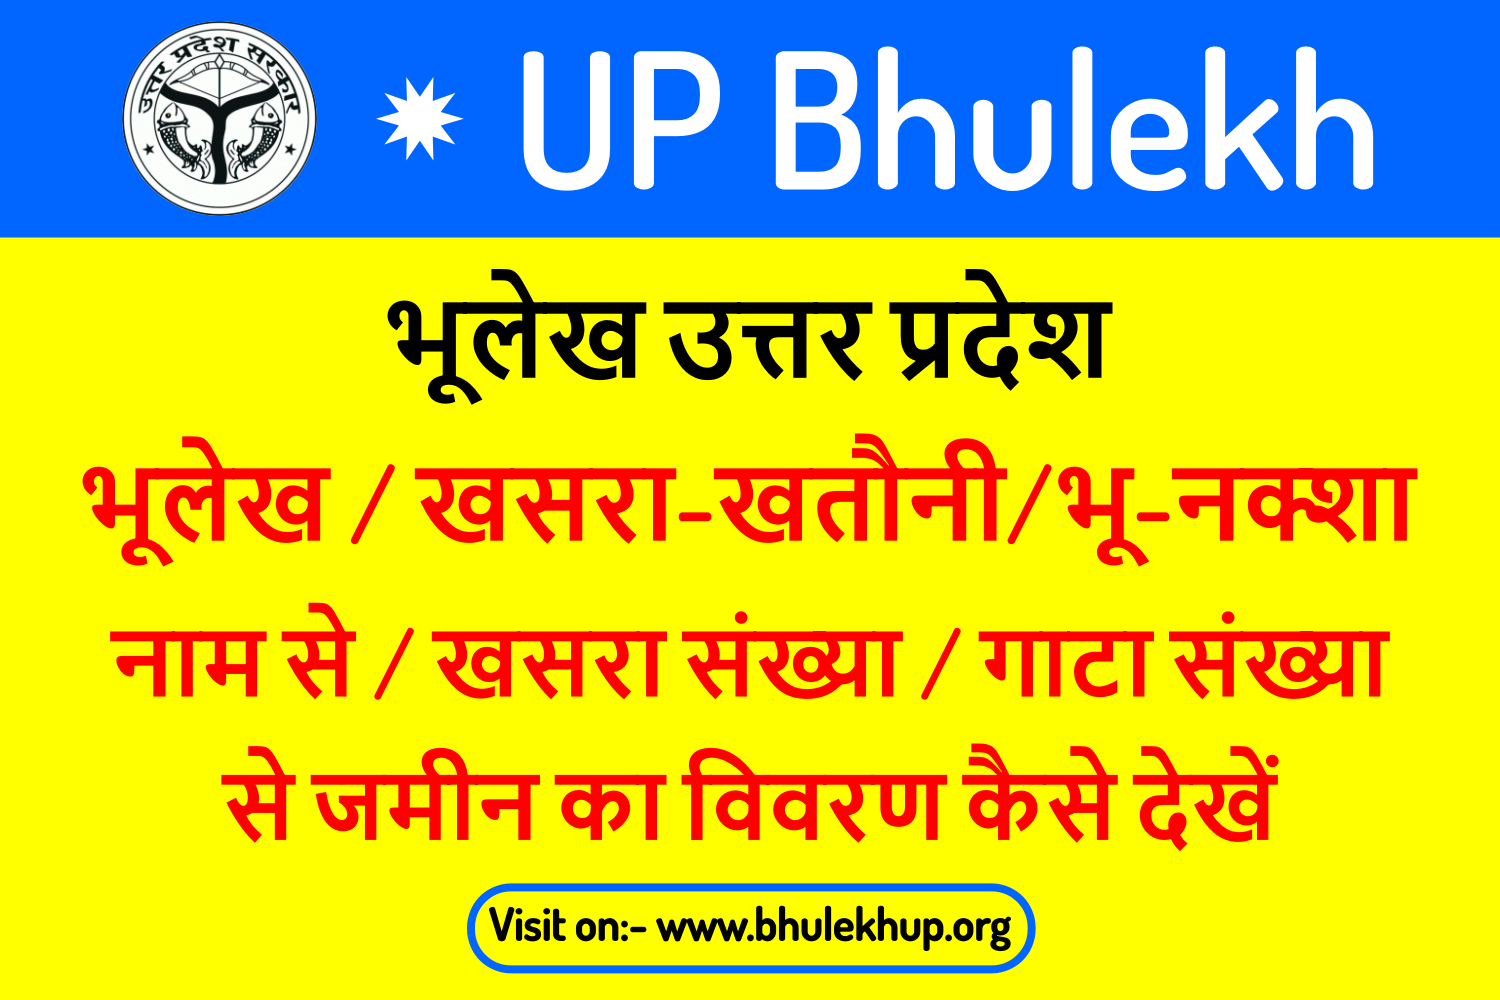 UP Bhlekh- How to check bhulekh up at home